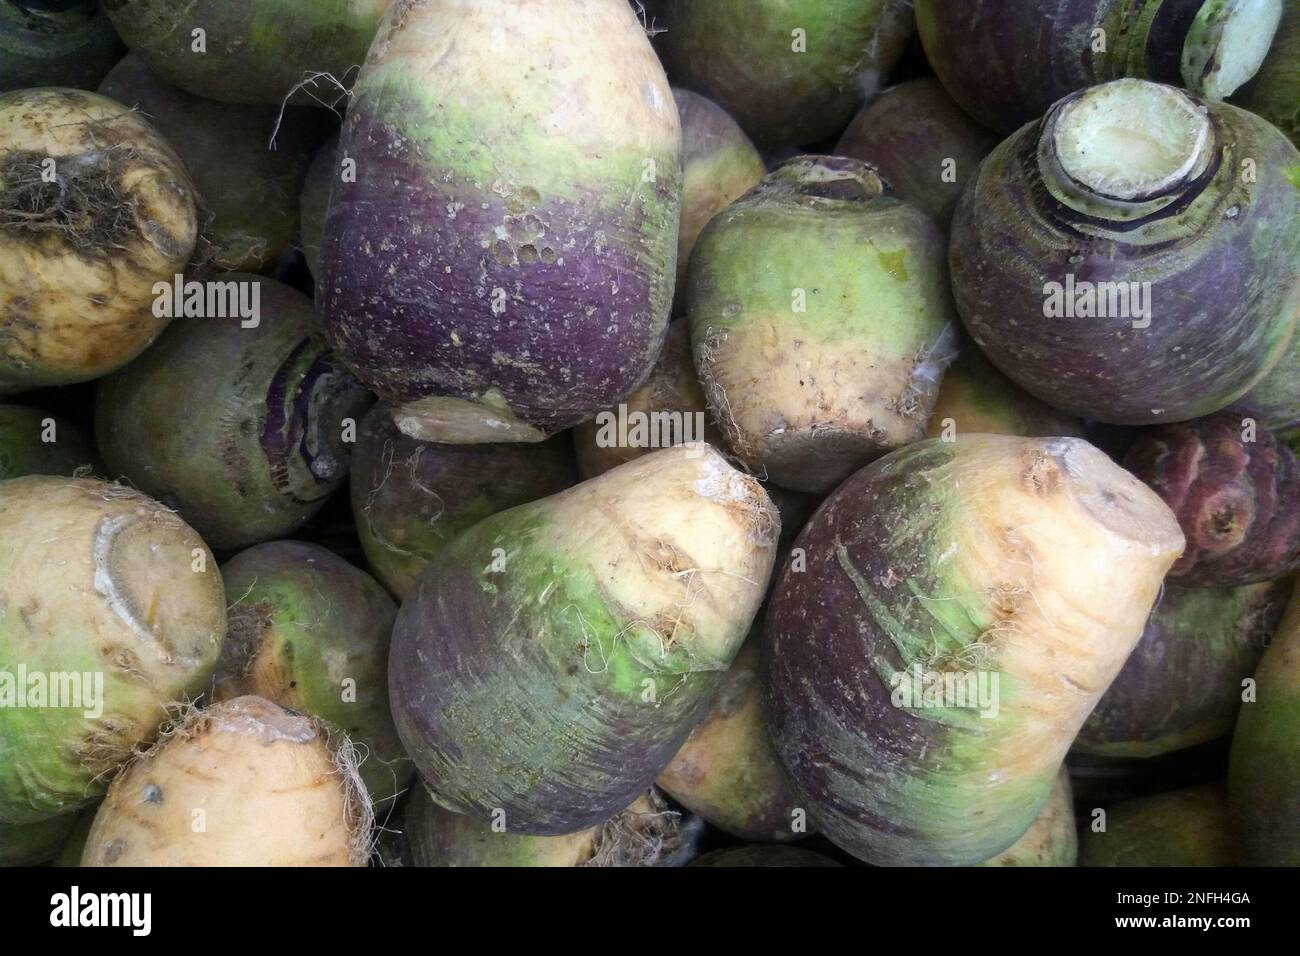 Close-up on a stack of rutabagas for sale on a market stall. Stock Photo